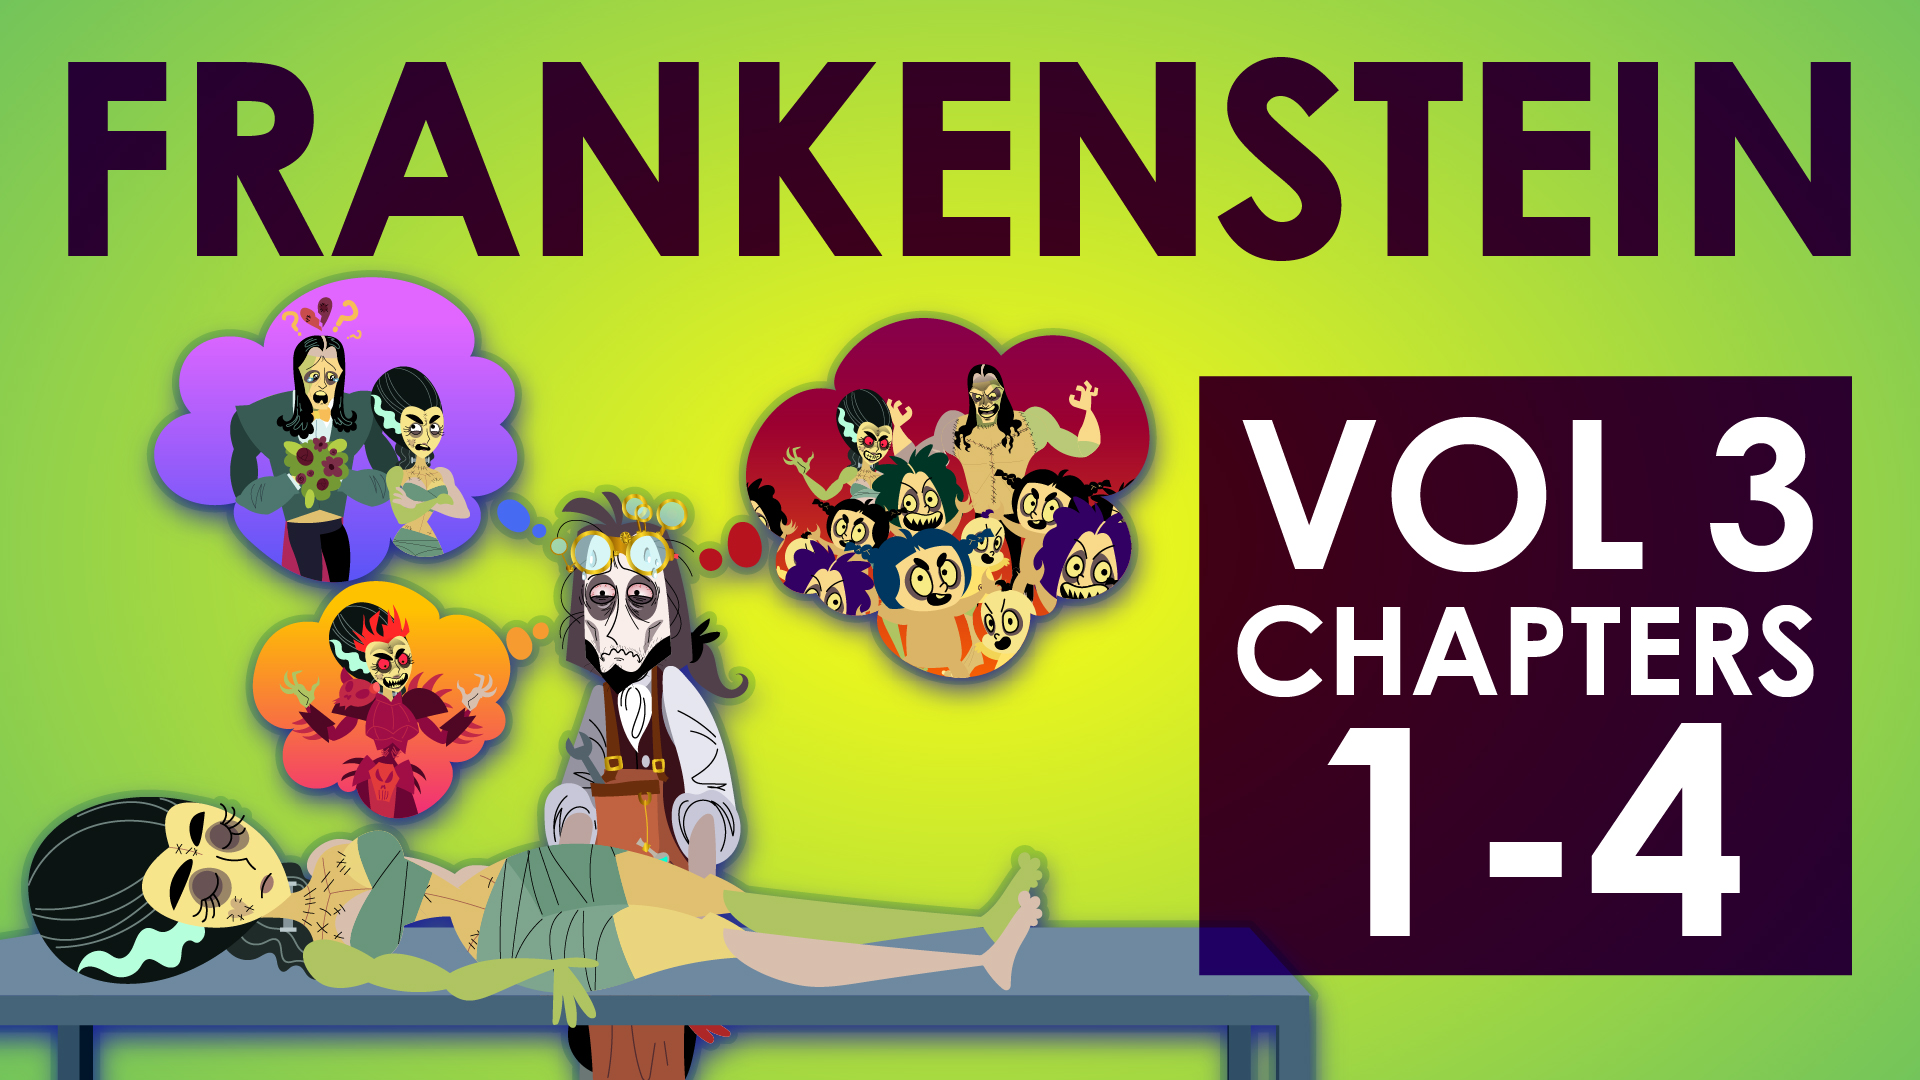 Frankenstein - Mary Shelley - Volume 3 Chapters 1-4 - Powering Through Prose Series